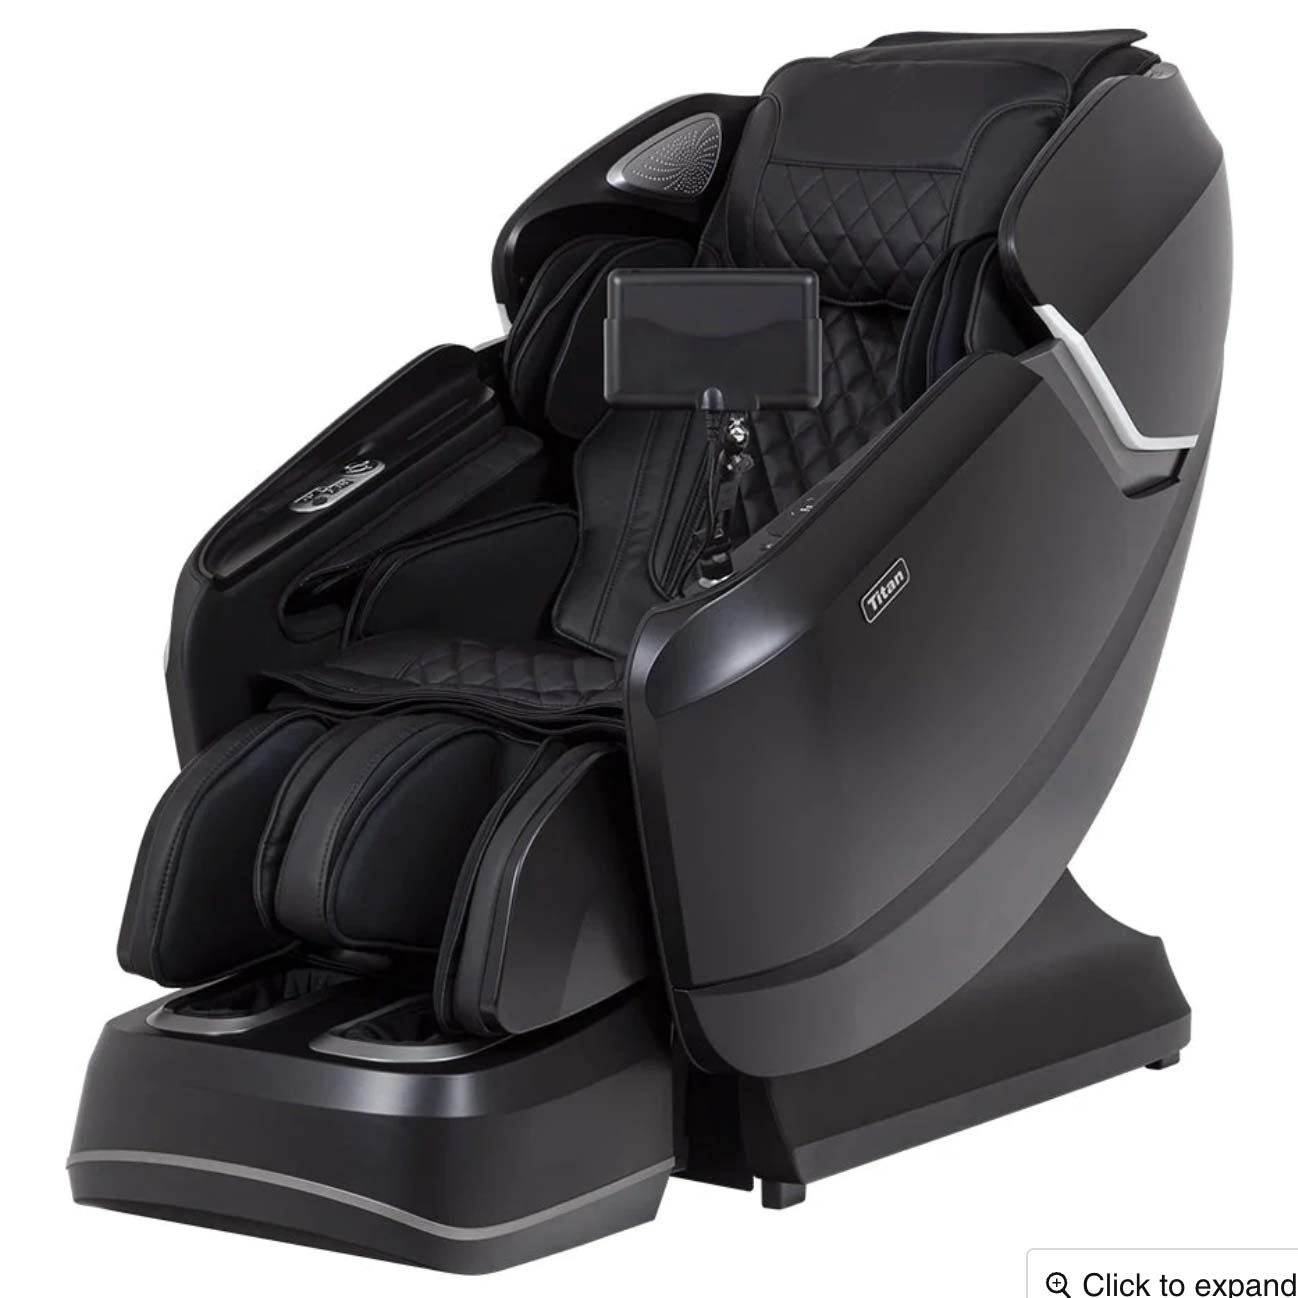 Black massage chair with LCD control